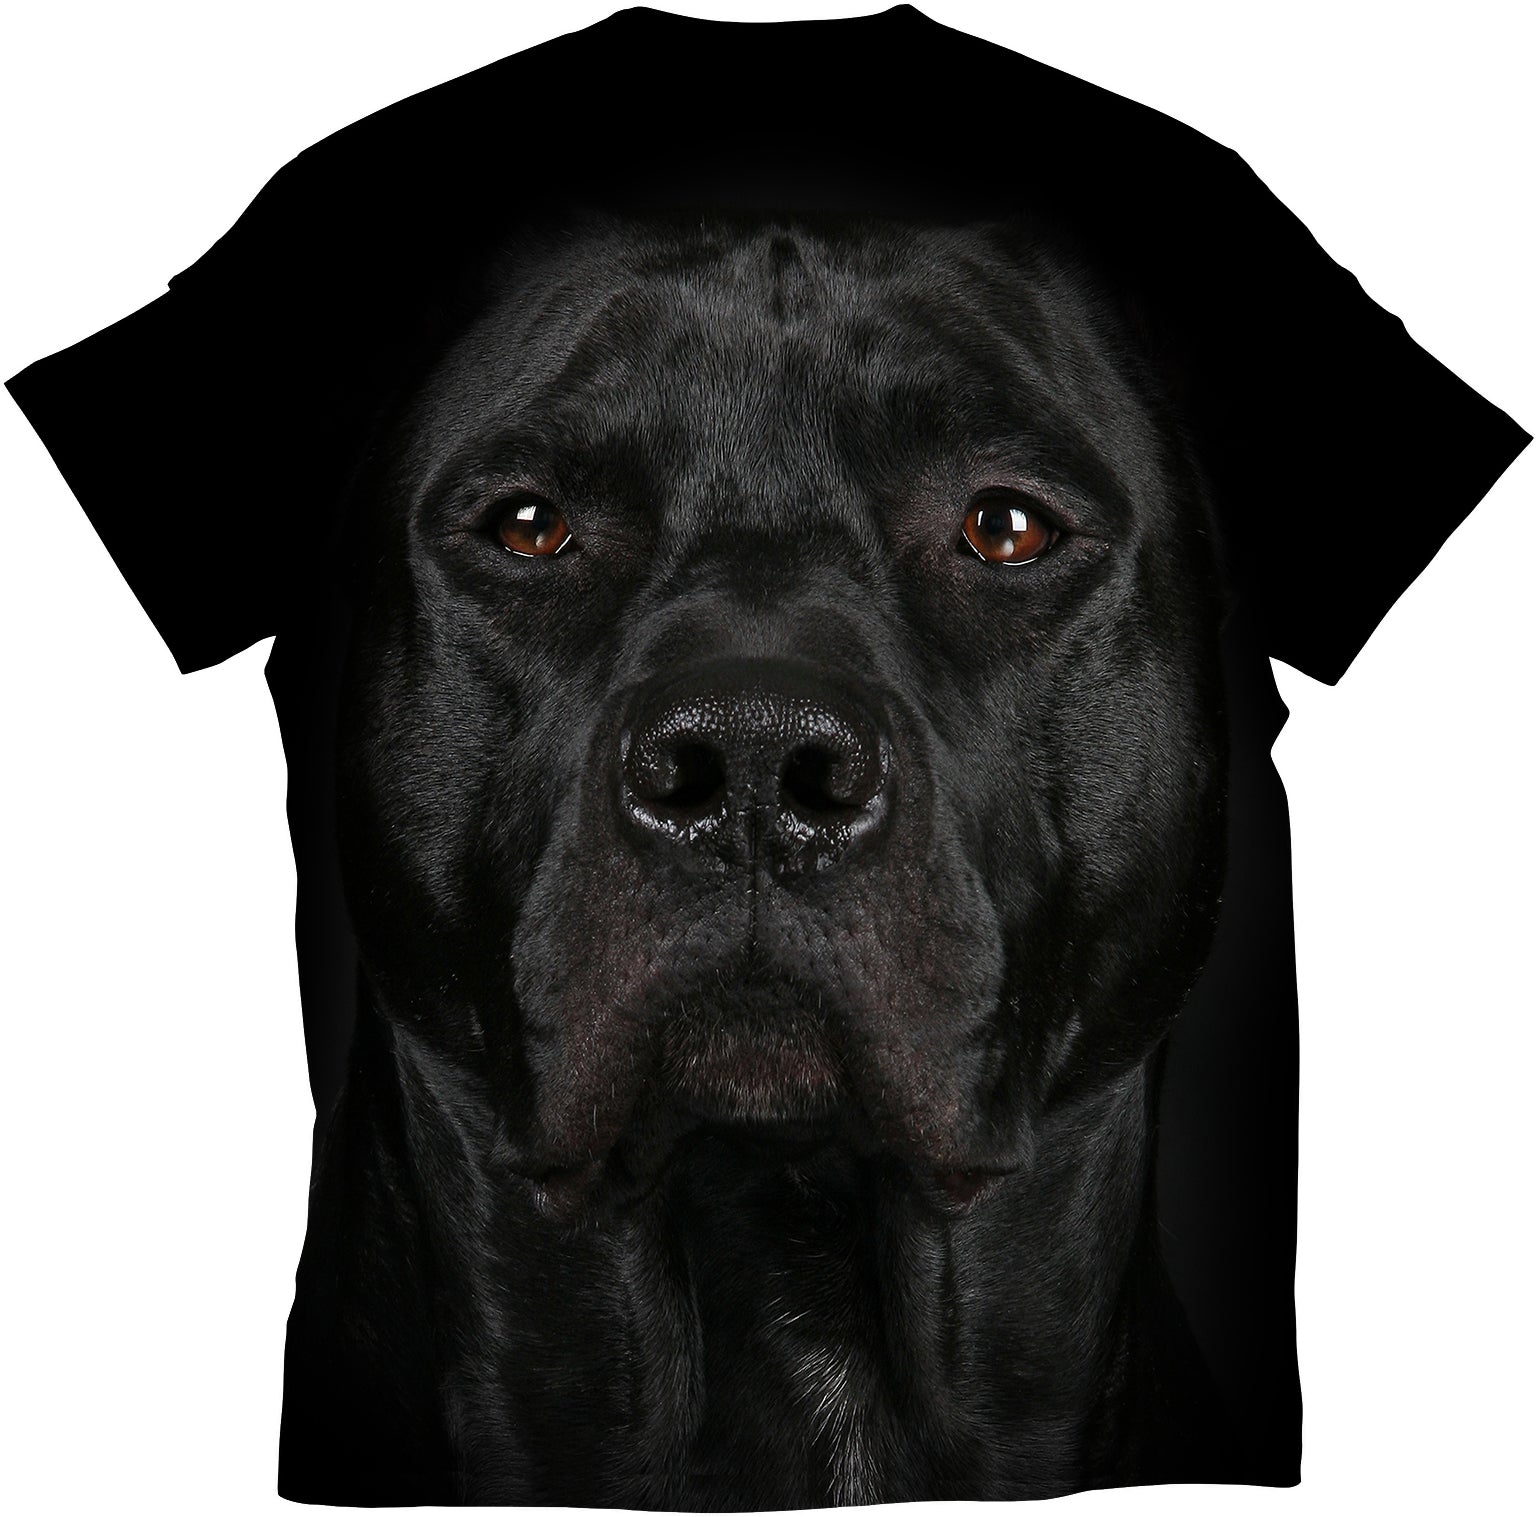 standout black pitbull t shirt dog face printed t shirt redwolf souled store bewakoof osomwear dog show in india the kennel club of india dog t shirts for humans funny dog shirts dog graphic t shirts dogteeshop dog lover t shirt dog clothes online dog print t shirts india pet lover t shirt 3d animal print t shirts pet supply the mountain t shirt pit bull t shirt